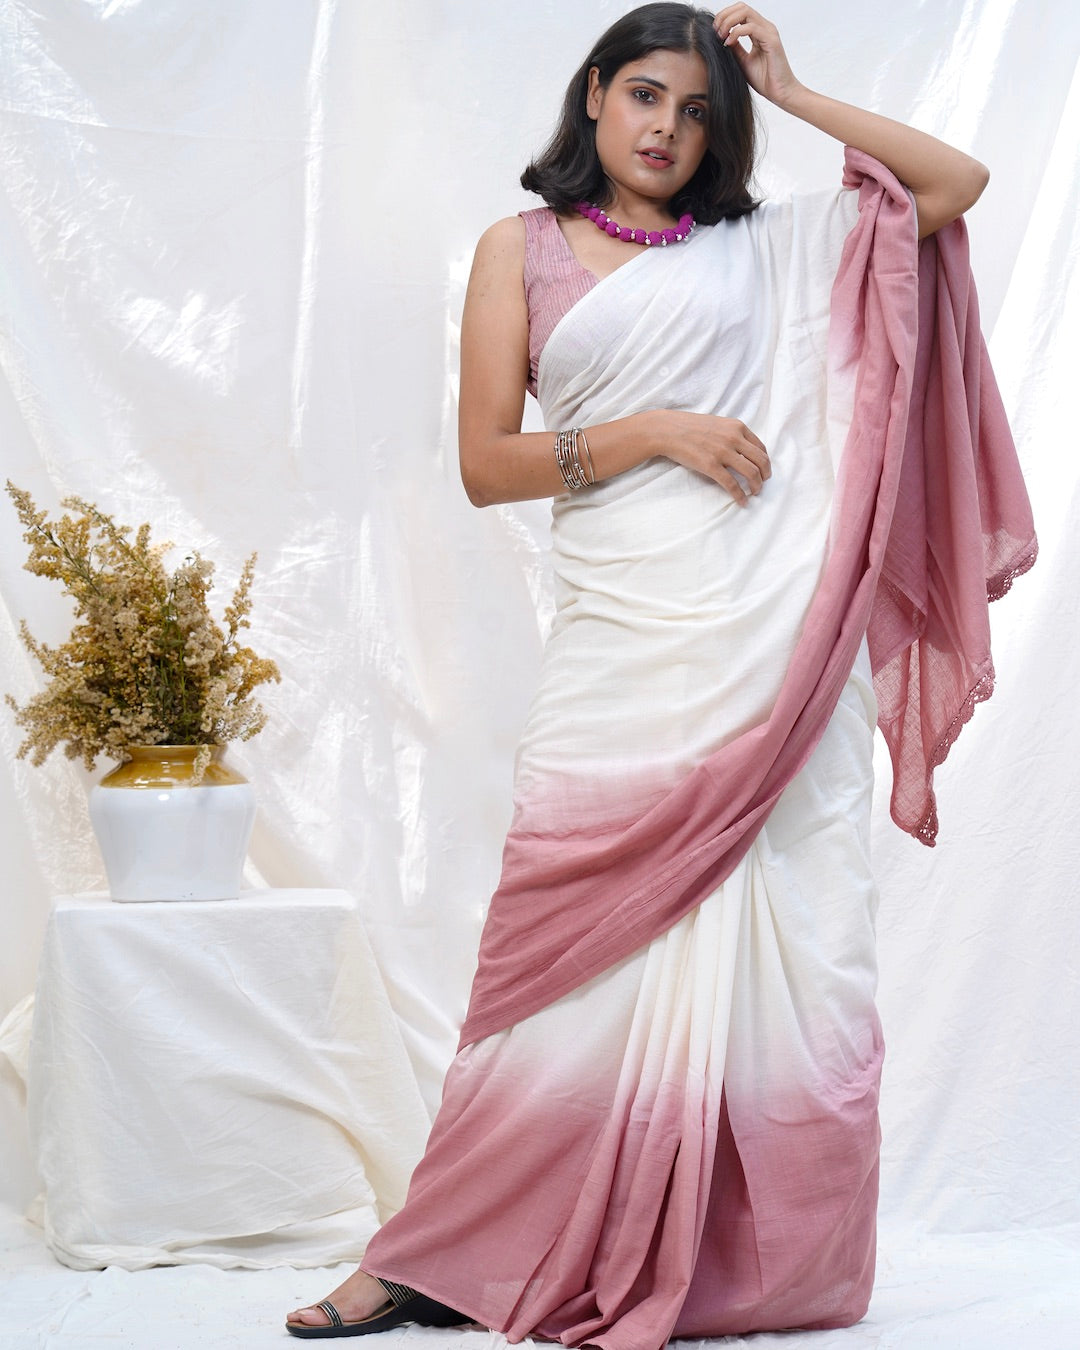 Rosy handwoven ombre cotton saree online available at bebaakstudio.com